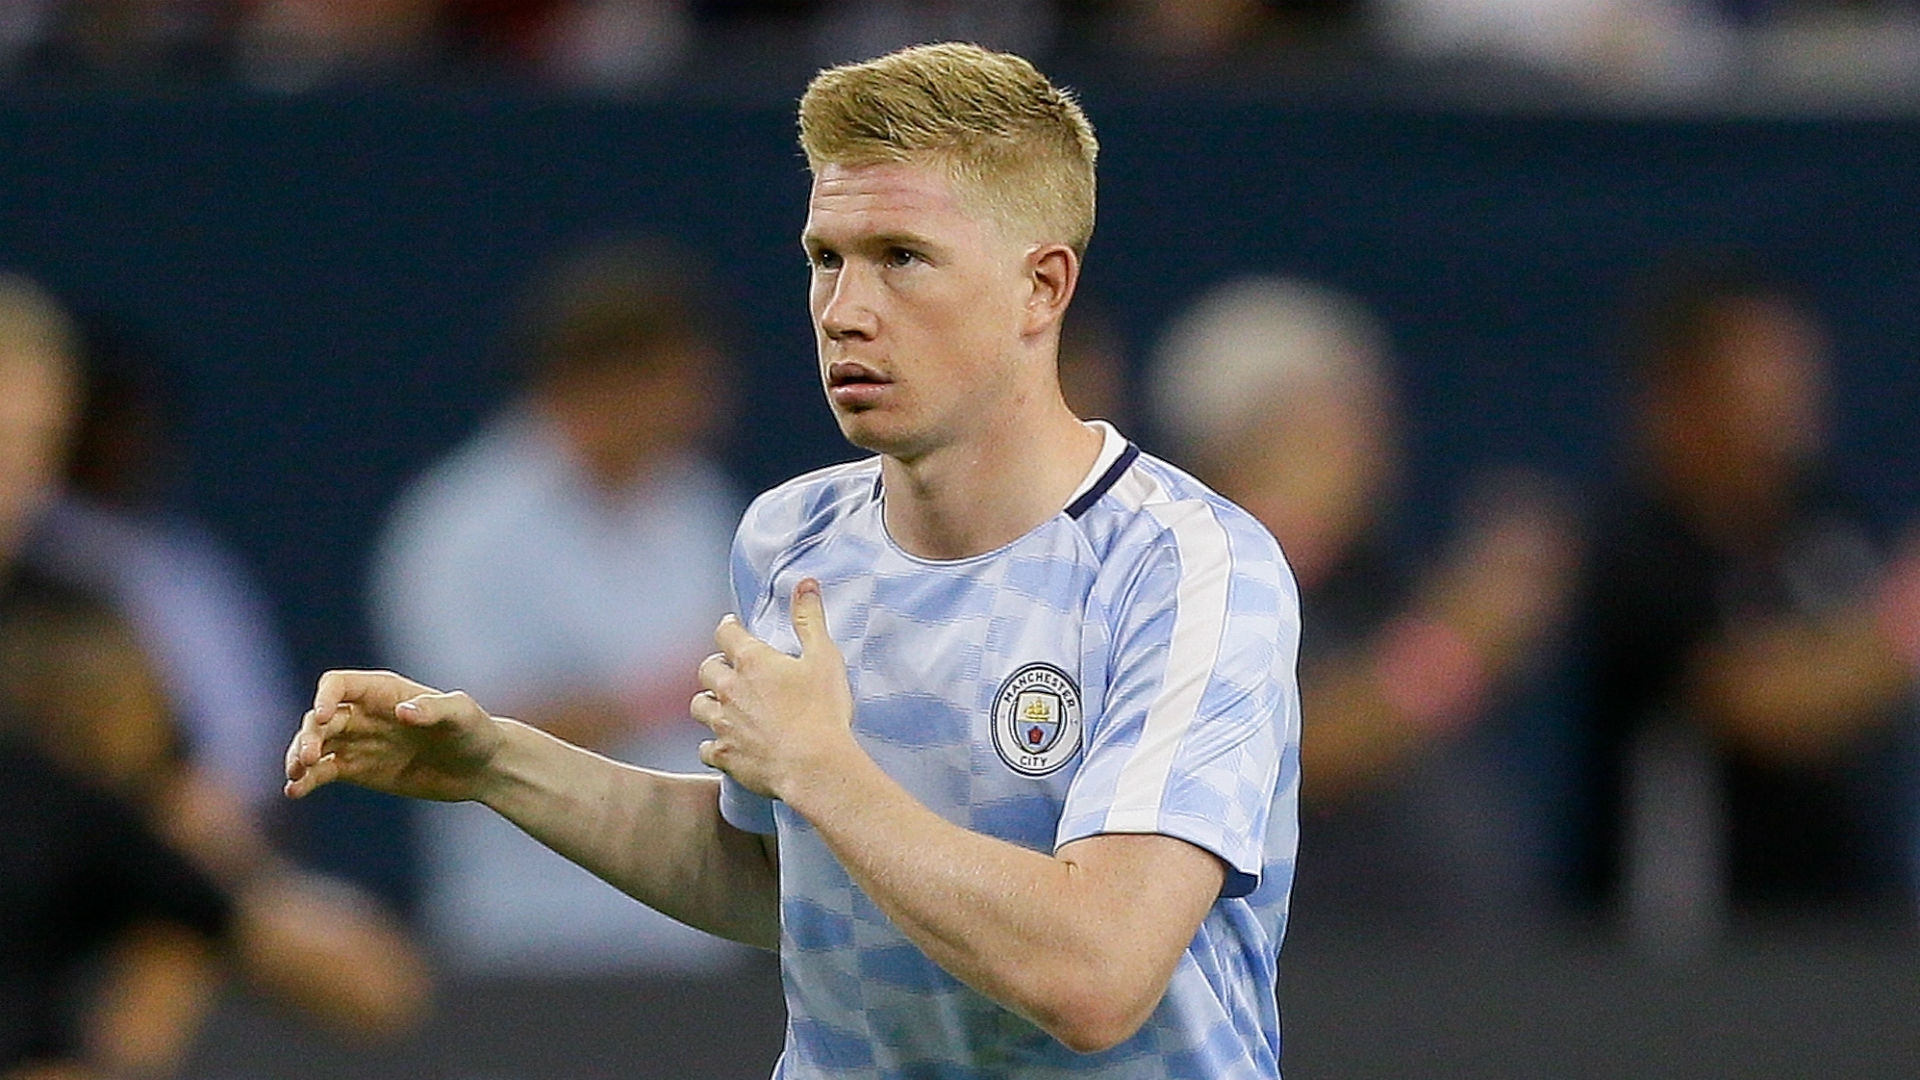 Manchester City have been one of the biggest spenders during the transfer window, but team star Kevin De Bruyne believes the expenses were justified.